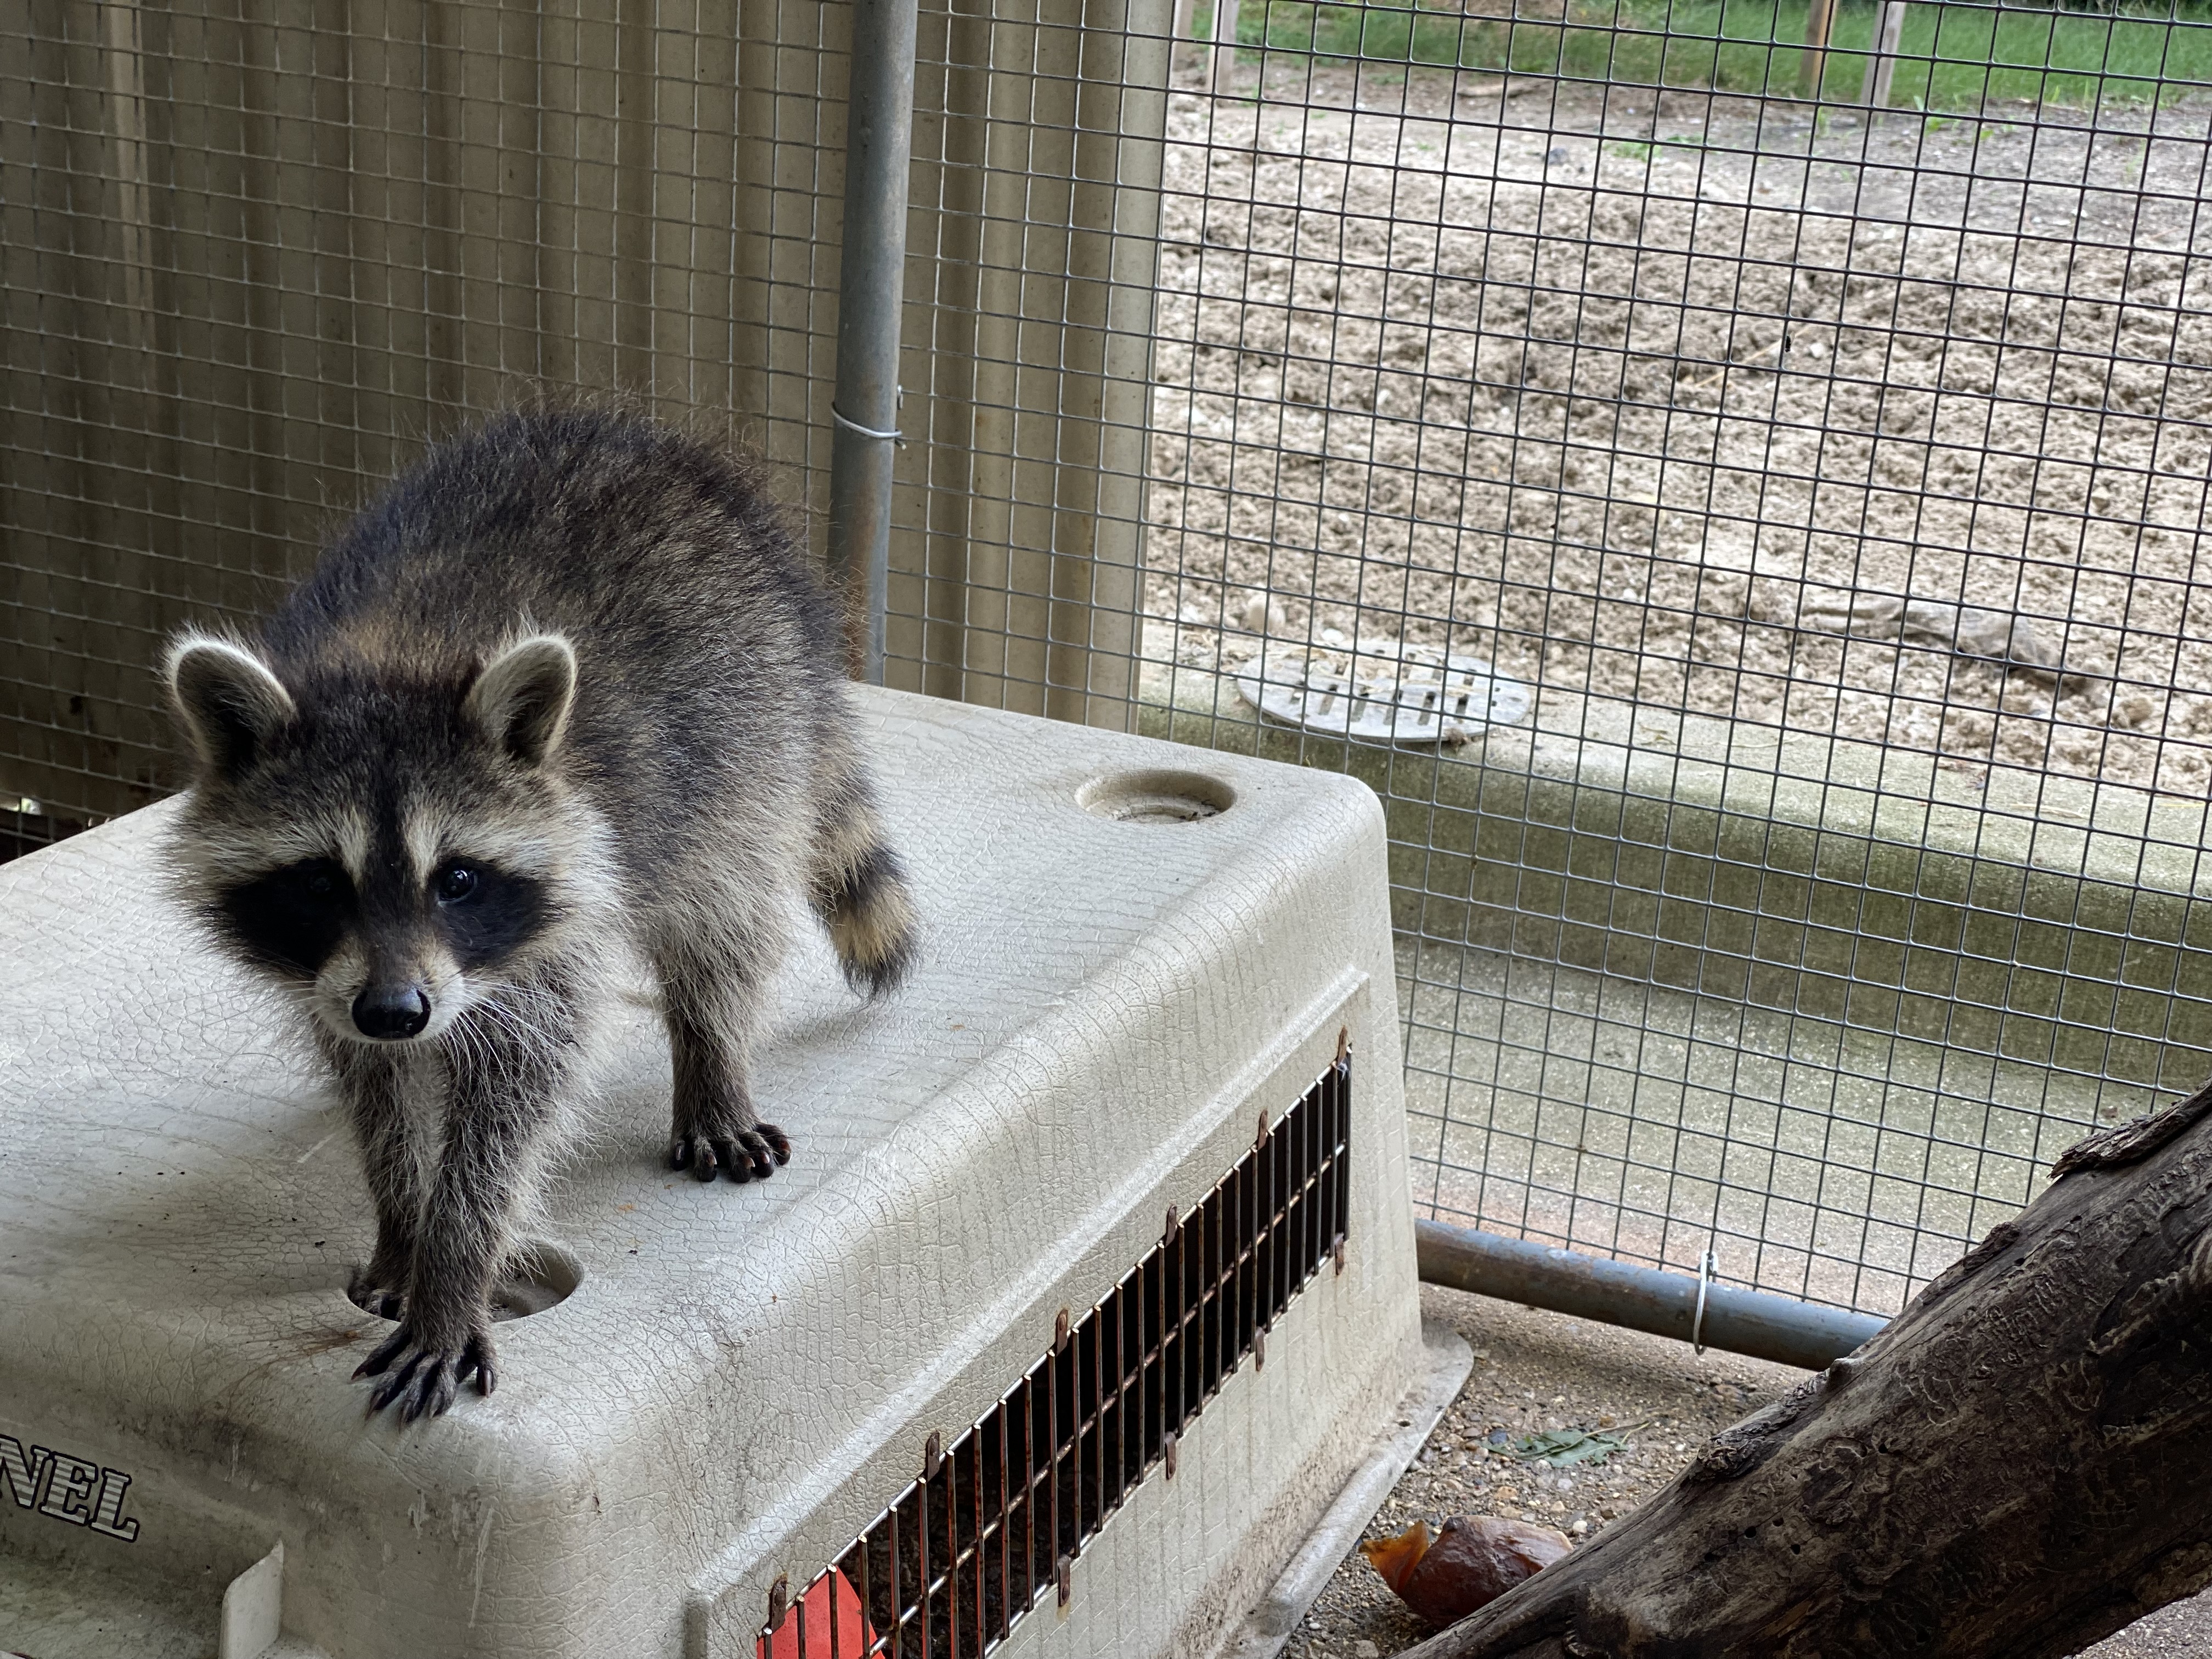 A Wild Life: Center for Wildlife Rescue, Rehabilitation, and Release